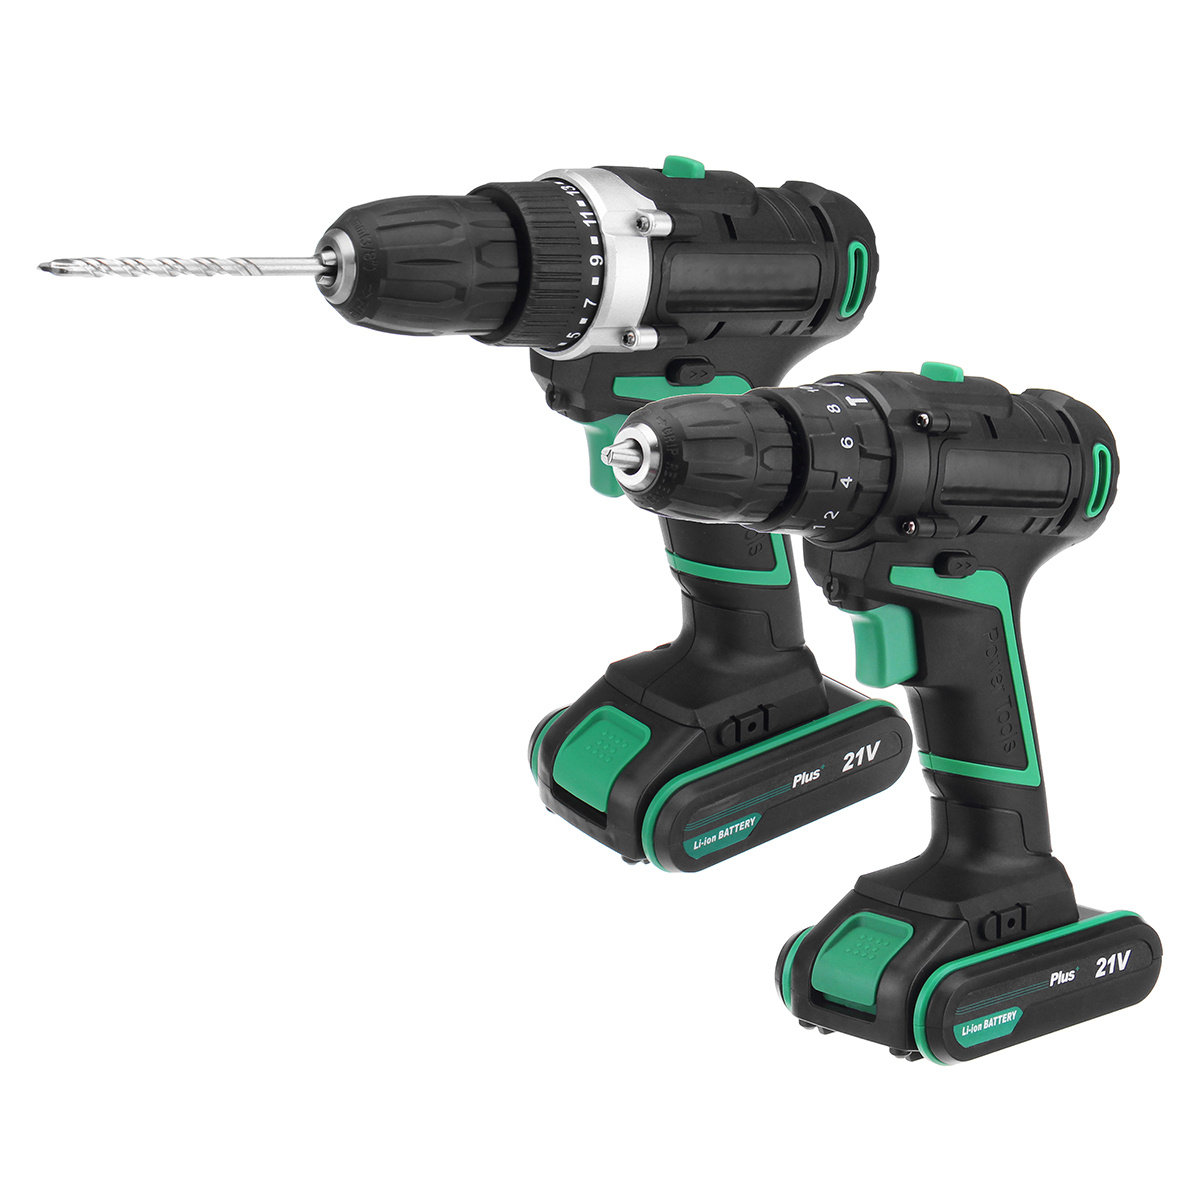 AC100-240V-Li-ion-Cordless-Electric-Screwdriver-Power-Drills-1-Battery-1-Charger-With-Accessories-1285827-9